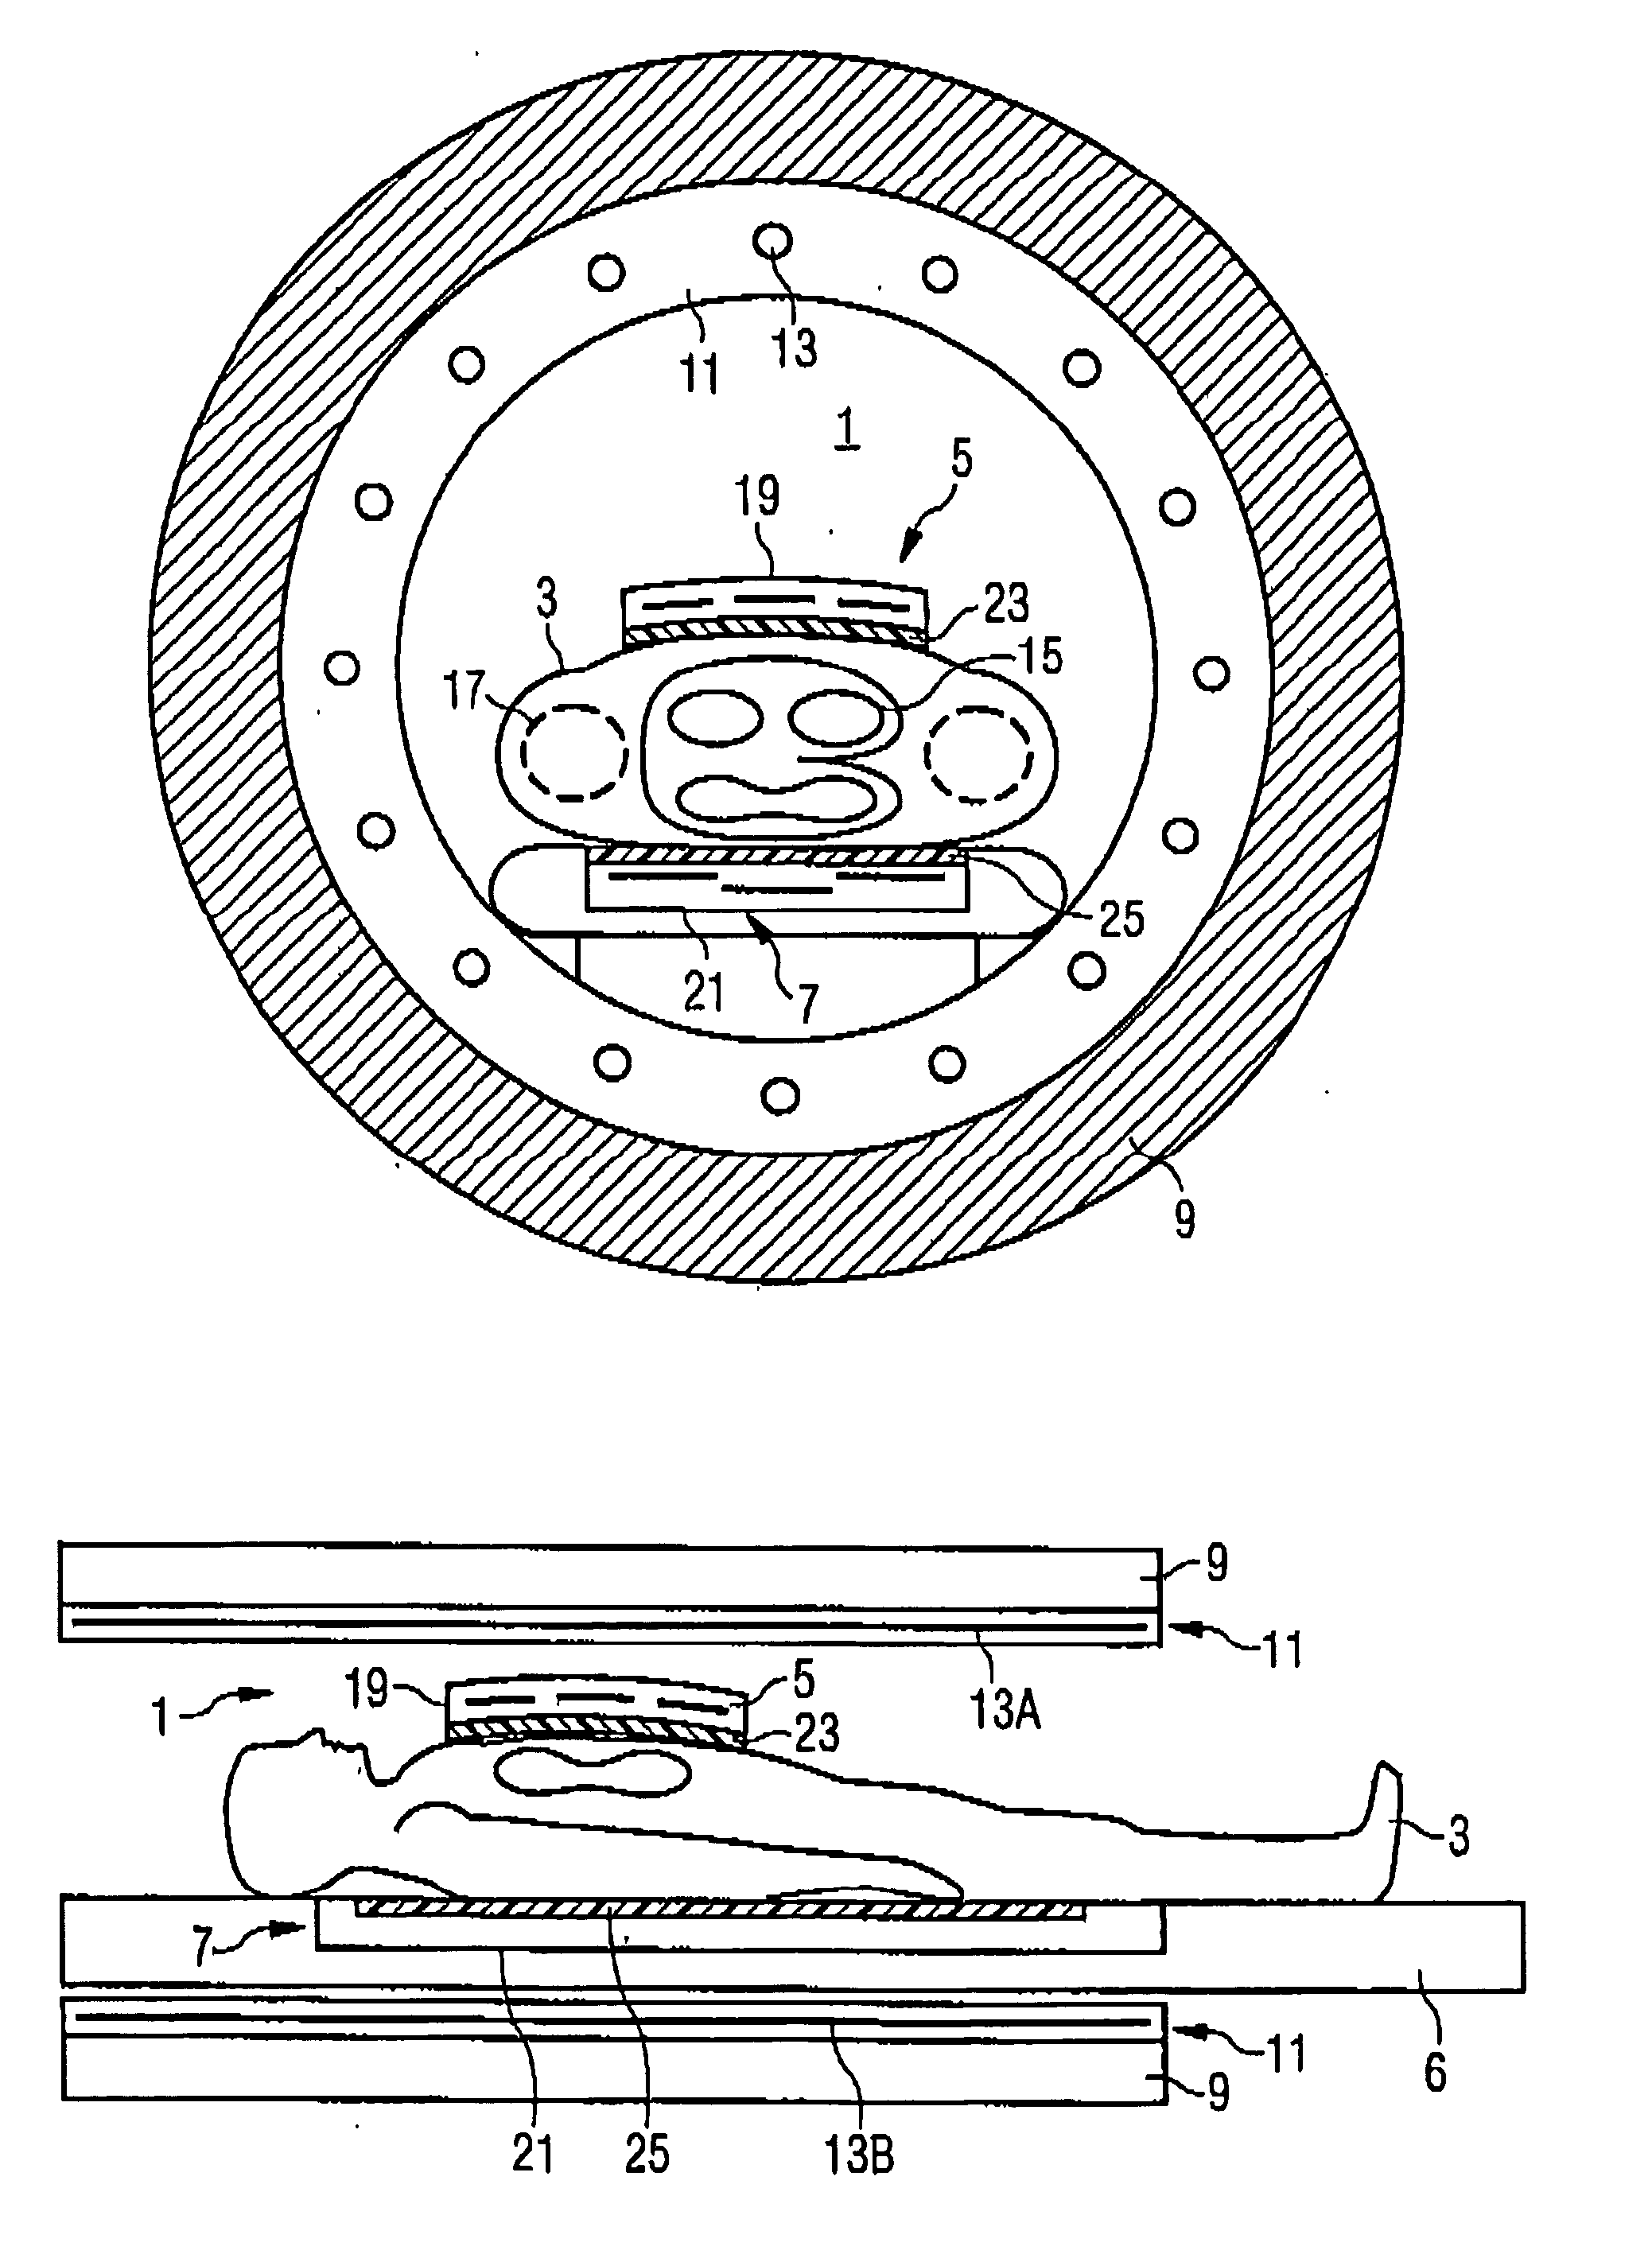 Local coil unit for a magnetic resonance apparatus